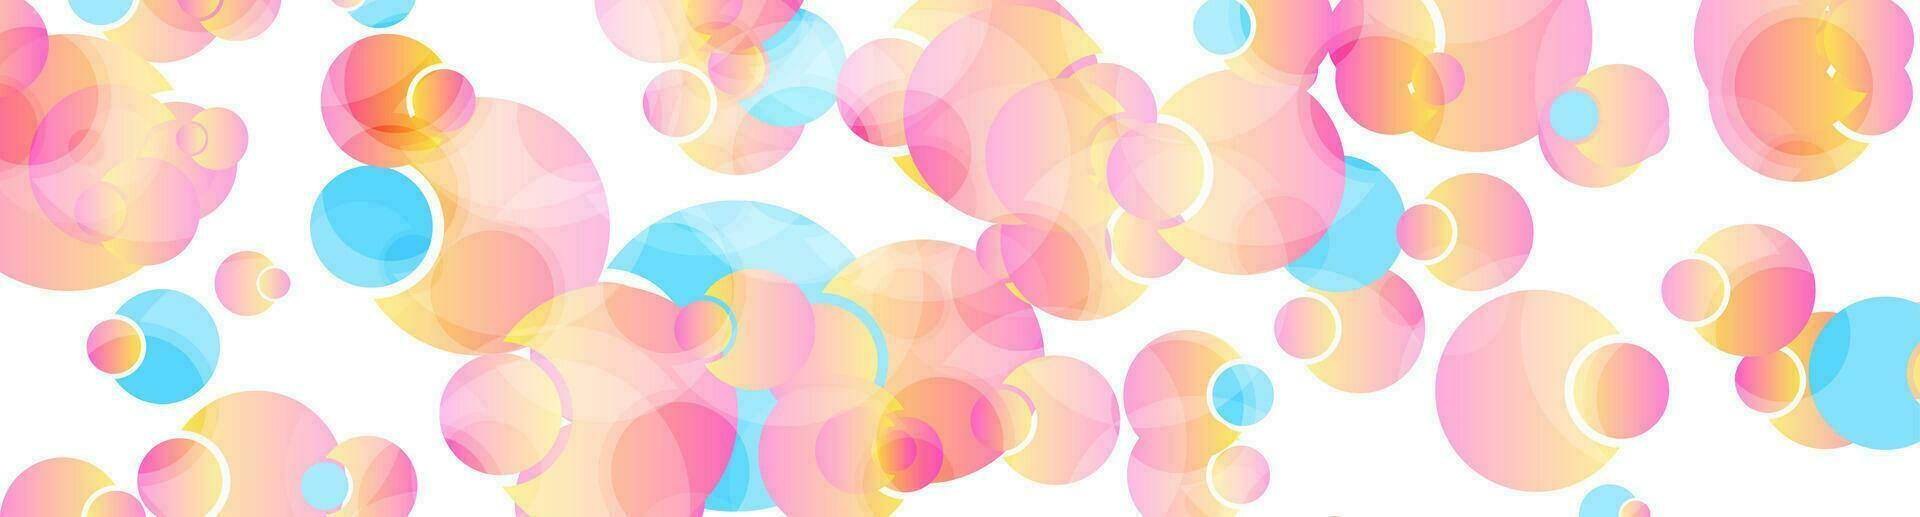 Colorful pastel circles abstract tech background vector